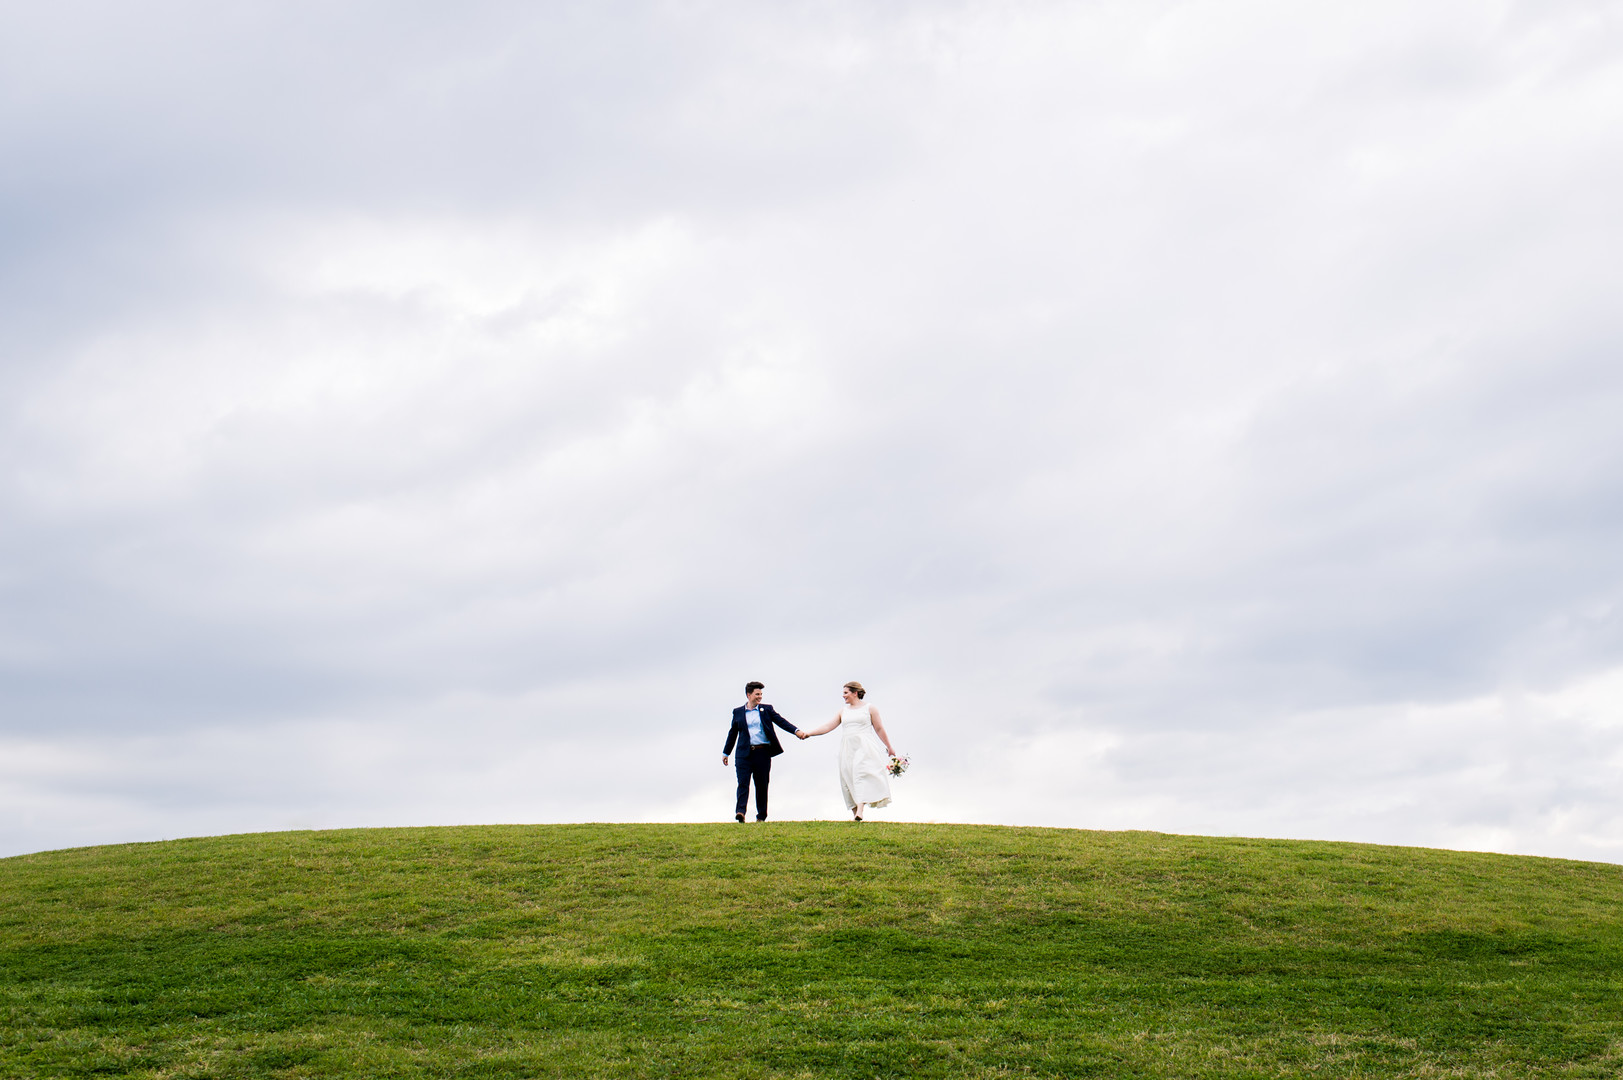 Intimate spring wedding at Butler Park in Austin, Texas LGBTQ+ weddings lesbian wedding two brides white dress navy blue suit hill